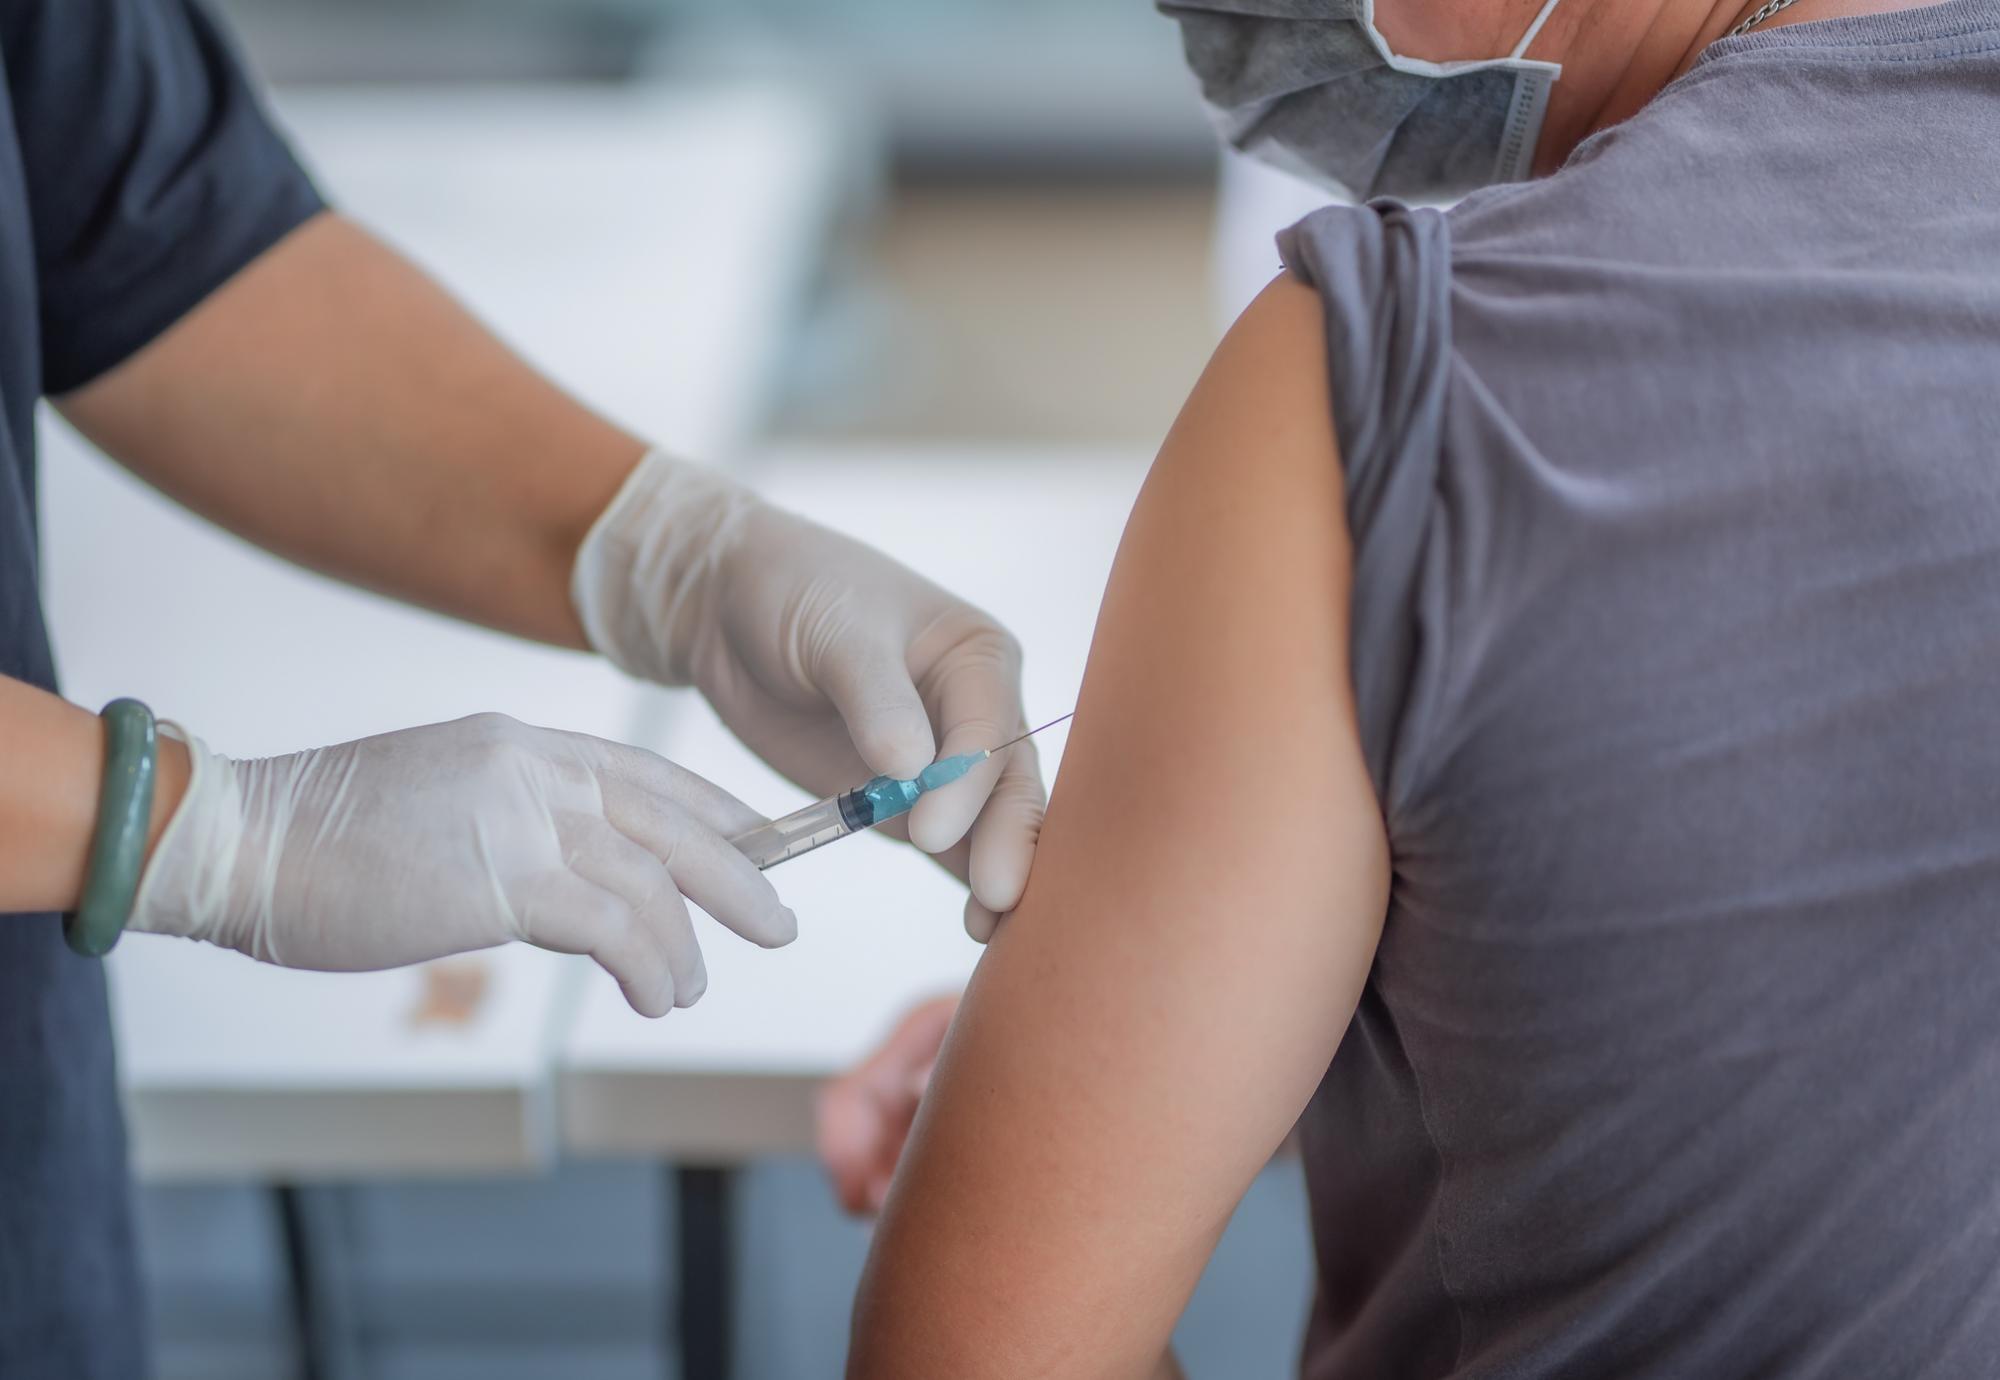 Medical professional administering a vaccine into a patient's arm